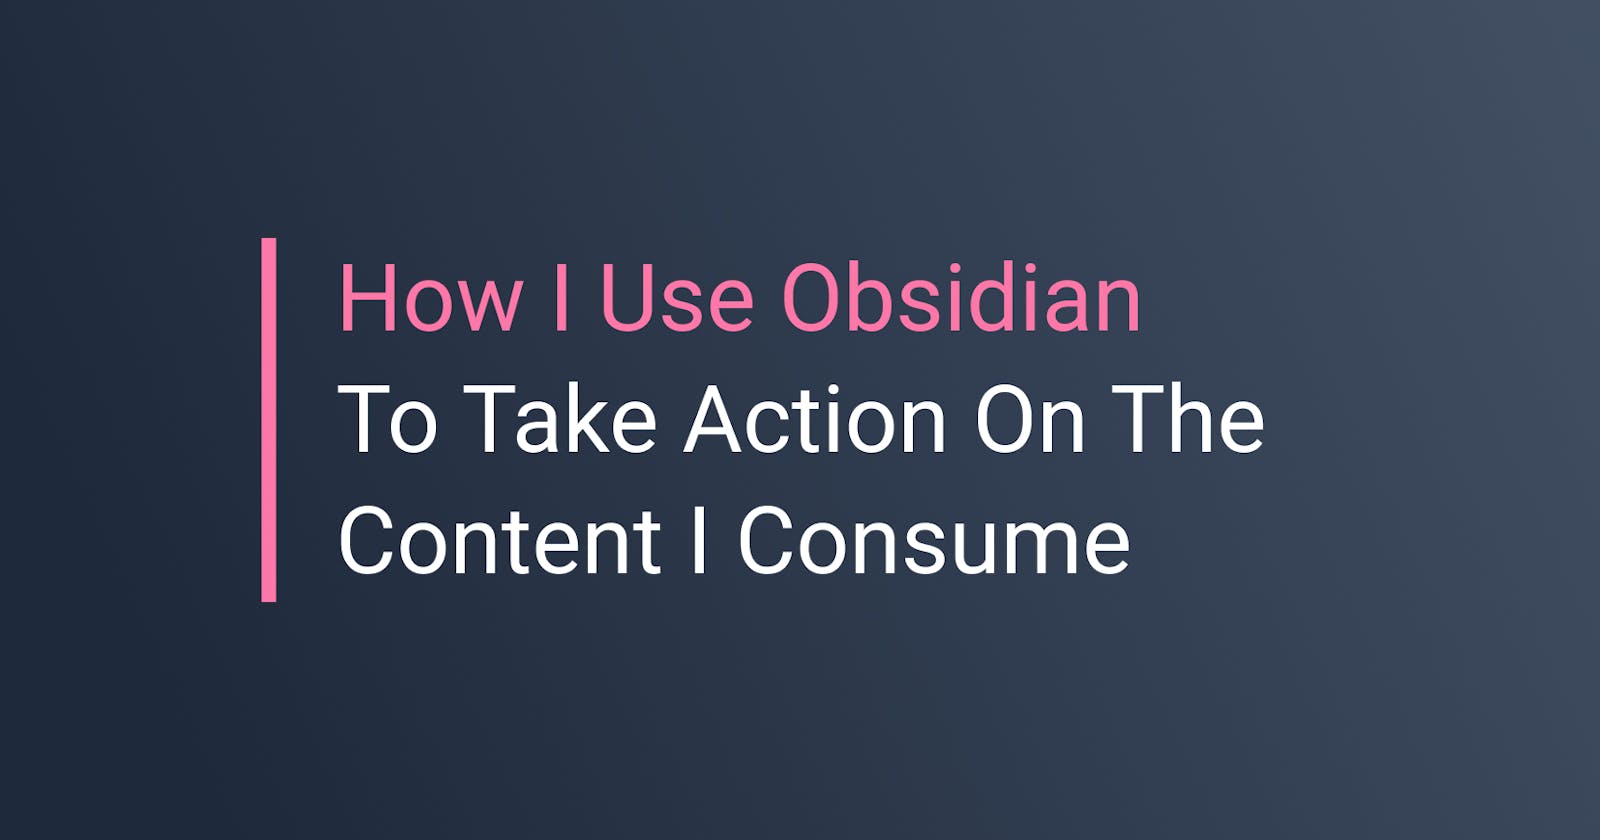 How I Use Obsidian To Take Action On The Content I Consume